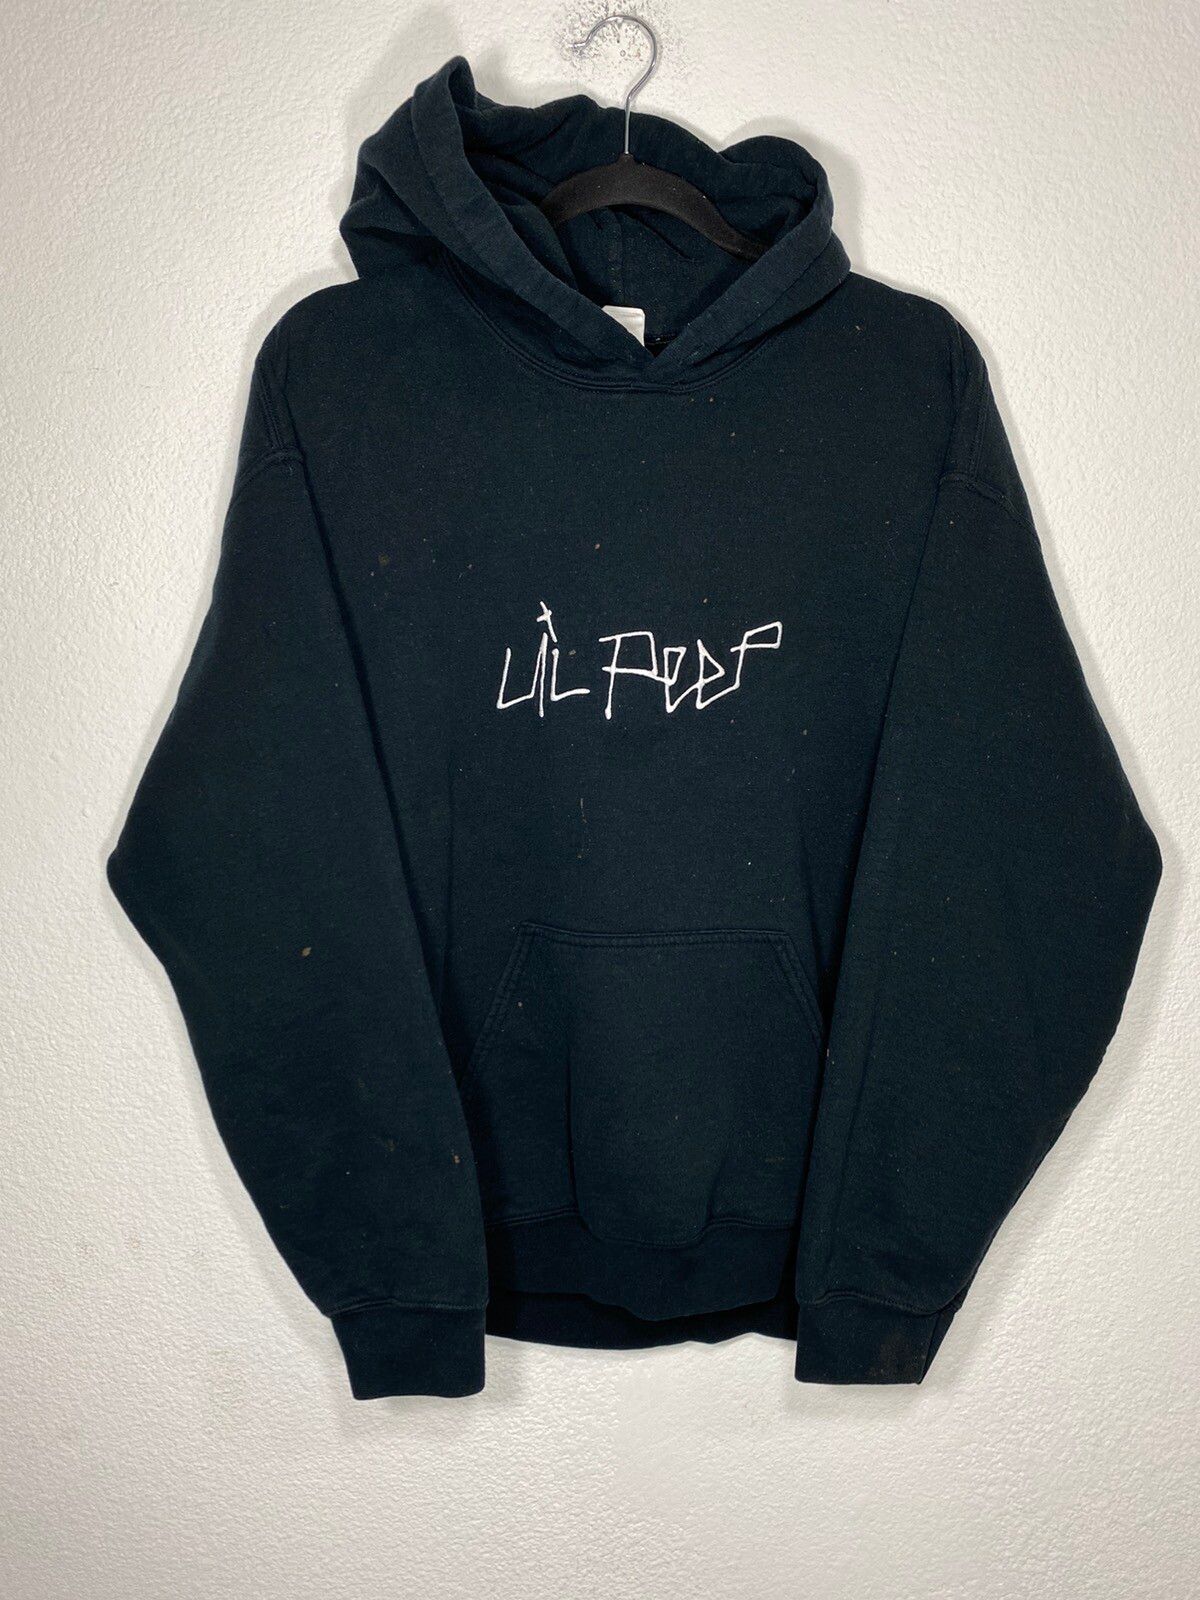 Band Tees LIL PEEP Come Over When Youre Sober Hoodie | Grailed